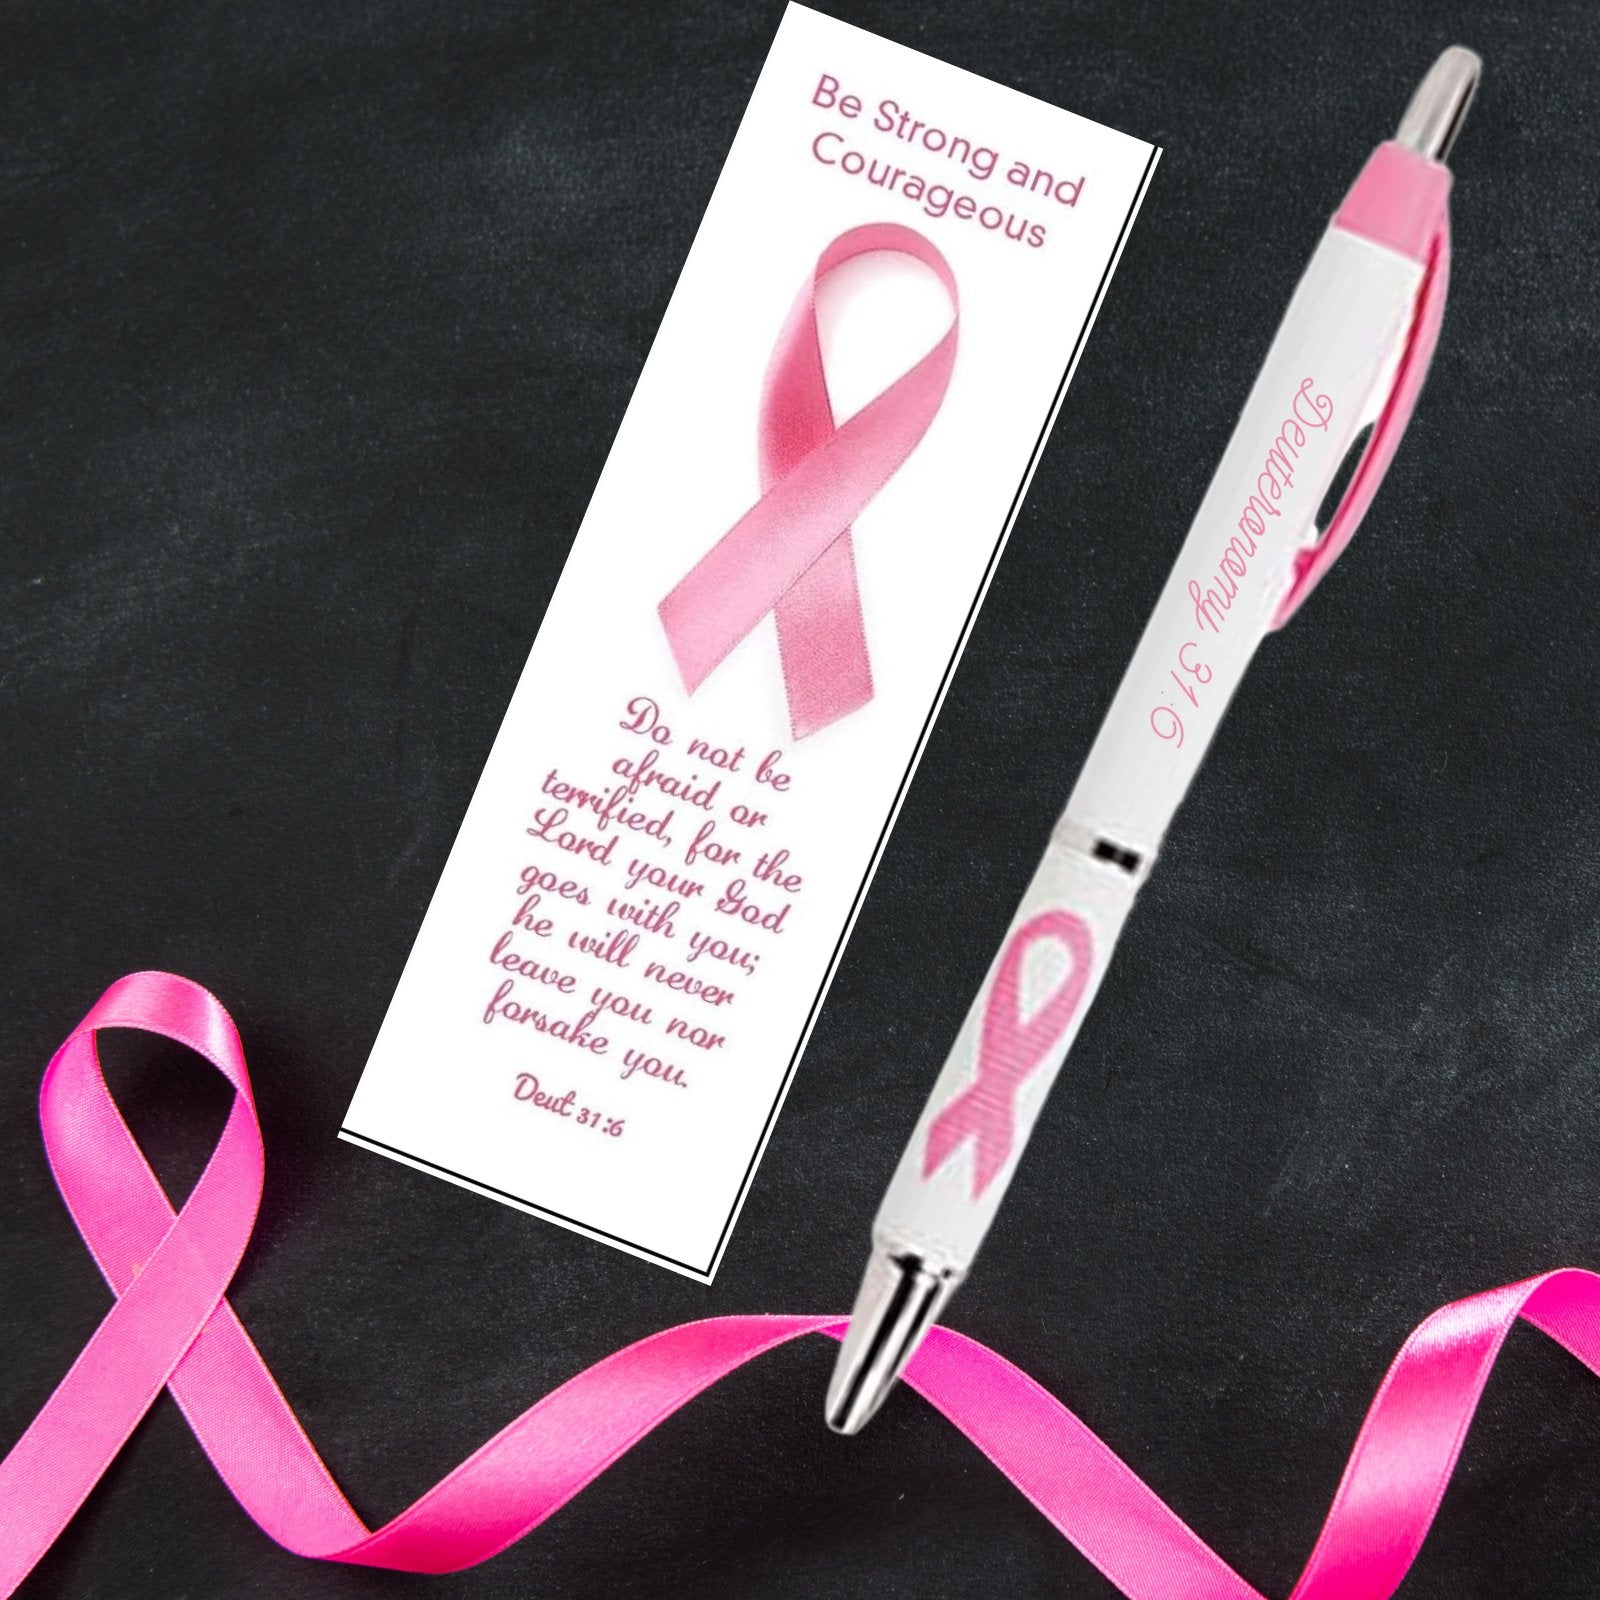 Christian Breast Cancer Awareness Pen and Bookmarks